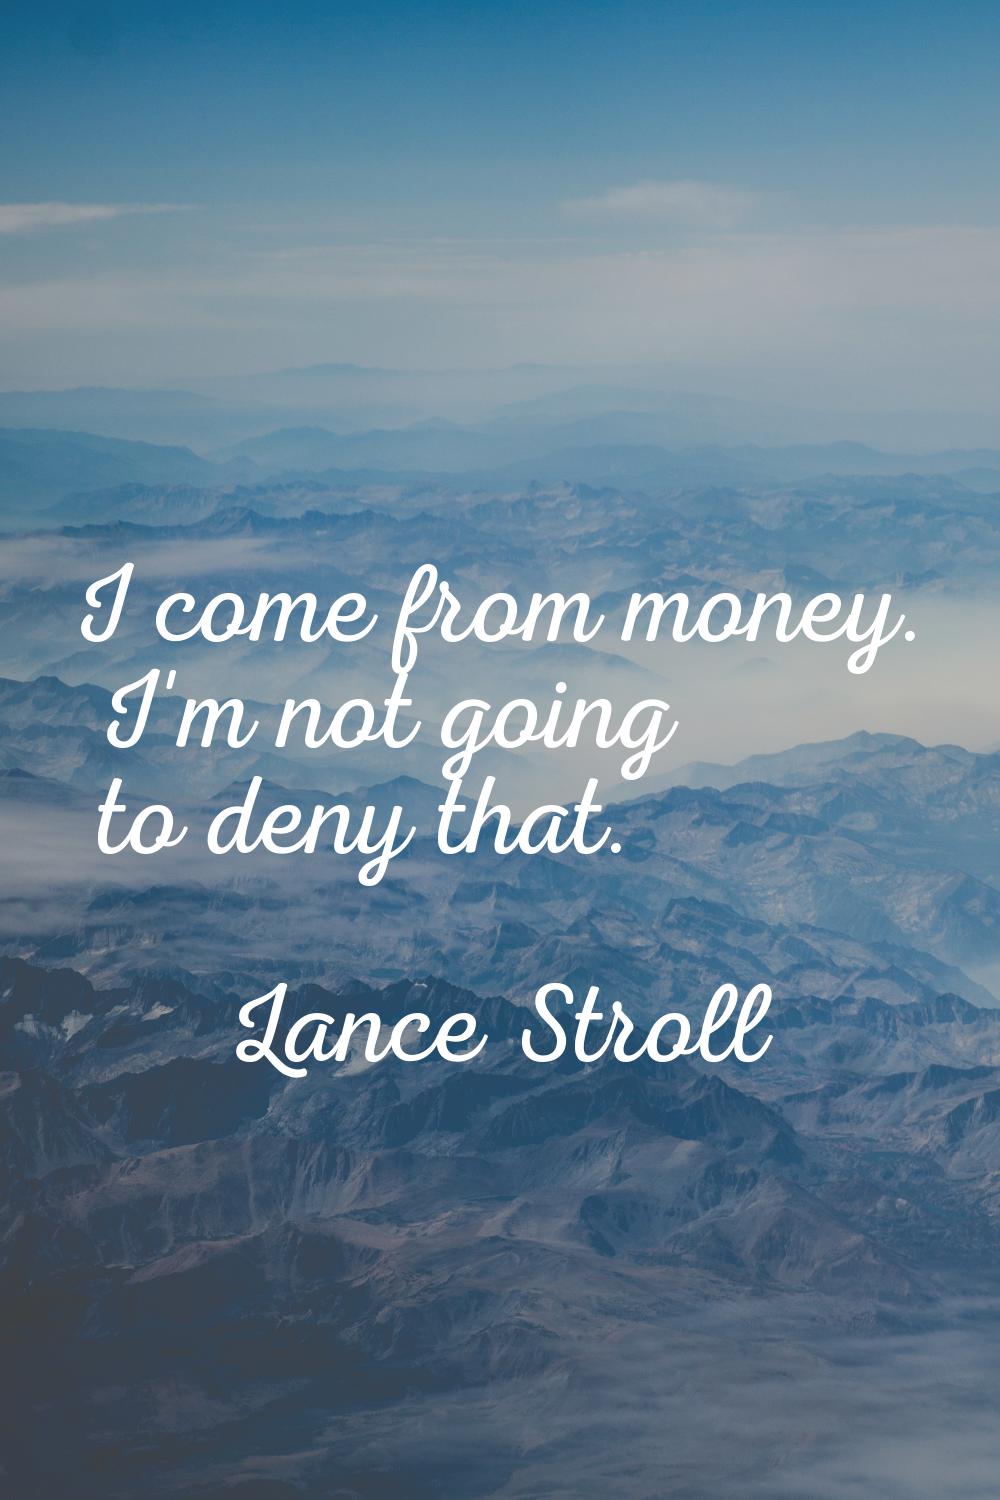 I come from money. I'm not going to deny that.